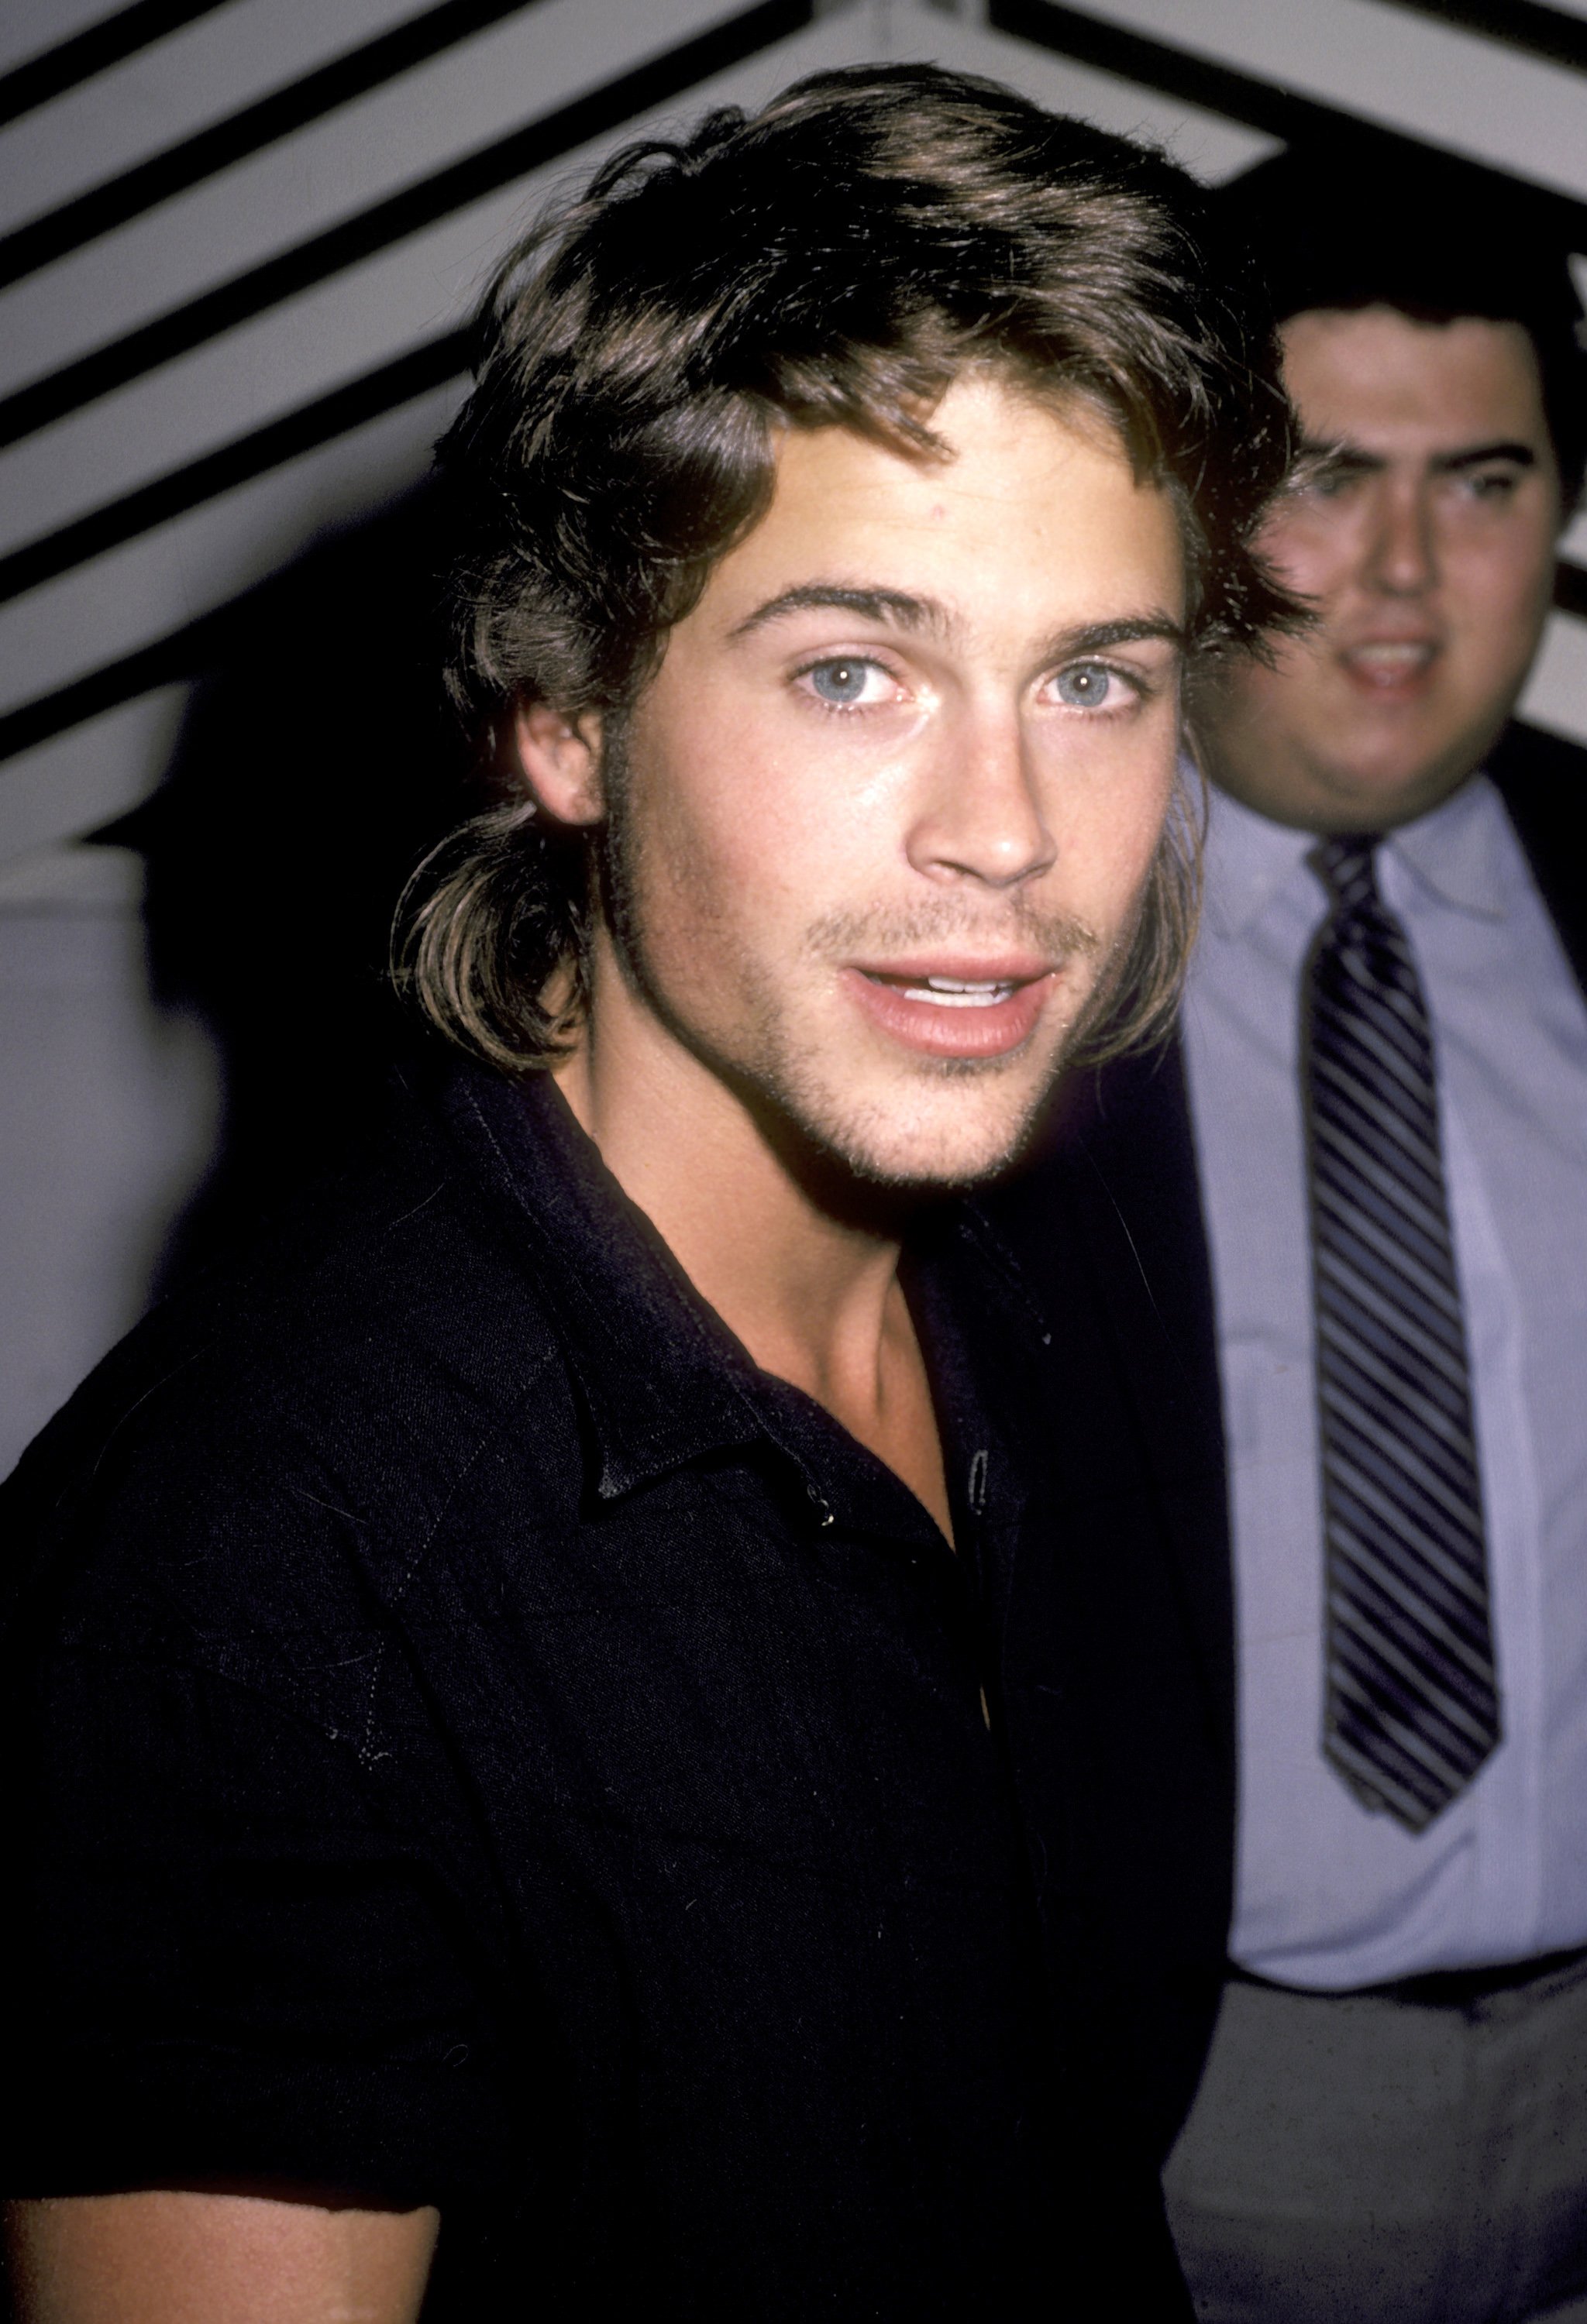 Former child star Rob Lowe sighting at Spago on October 9, 1985 in West Hollywood. / Source: Getty Images 